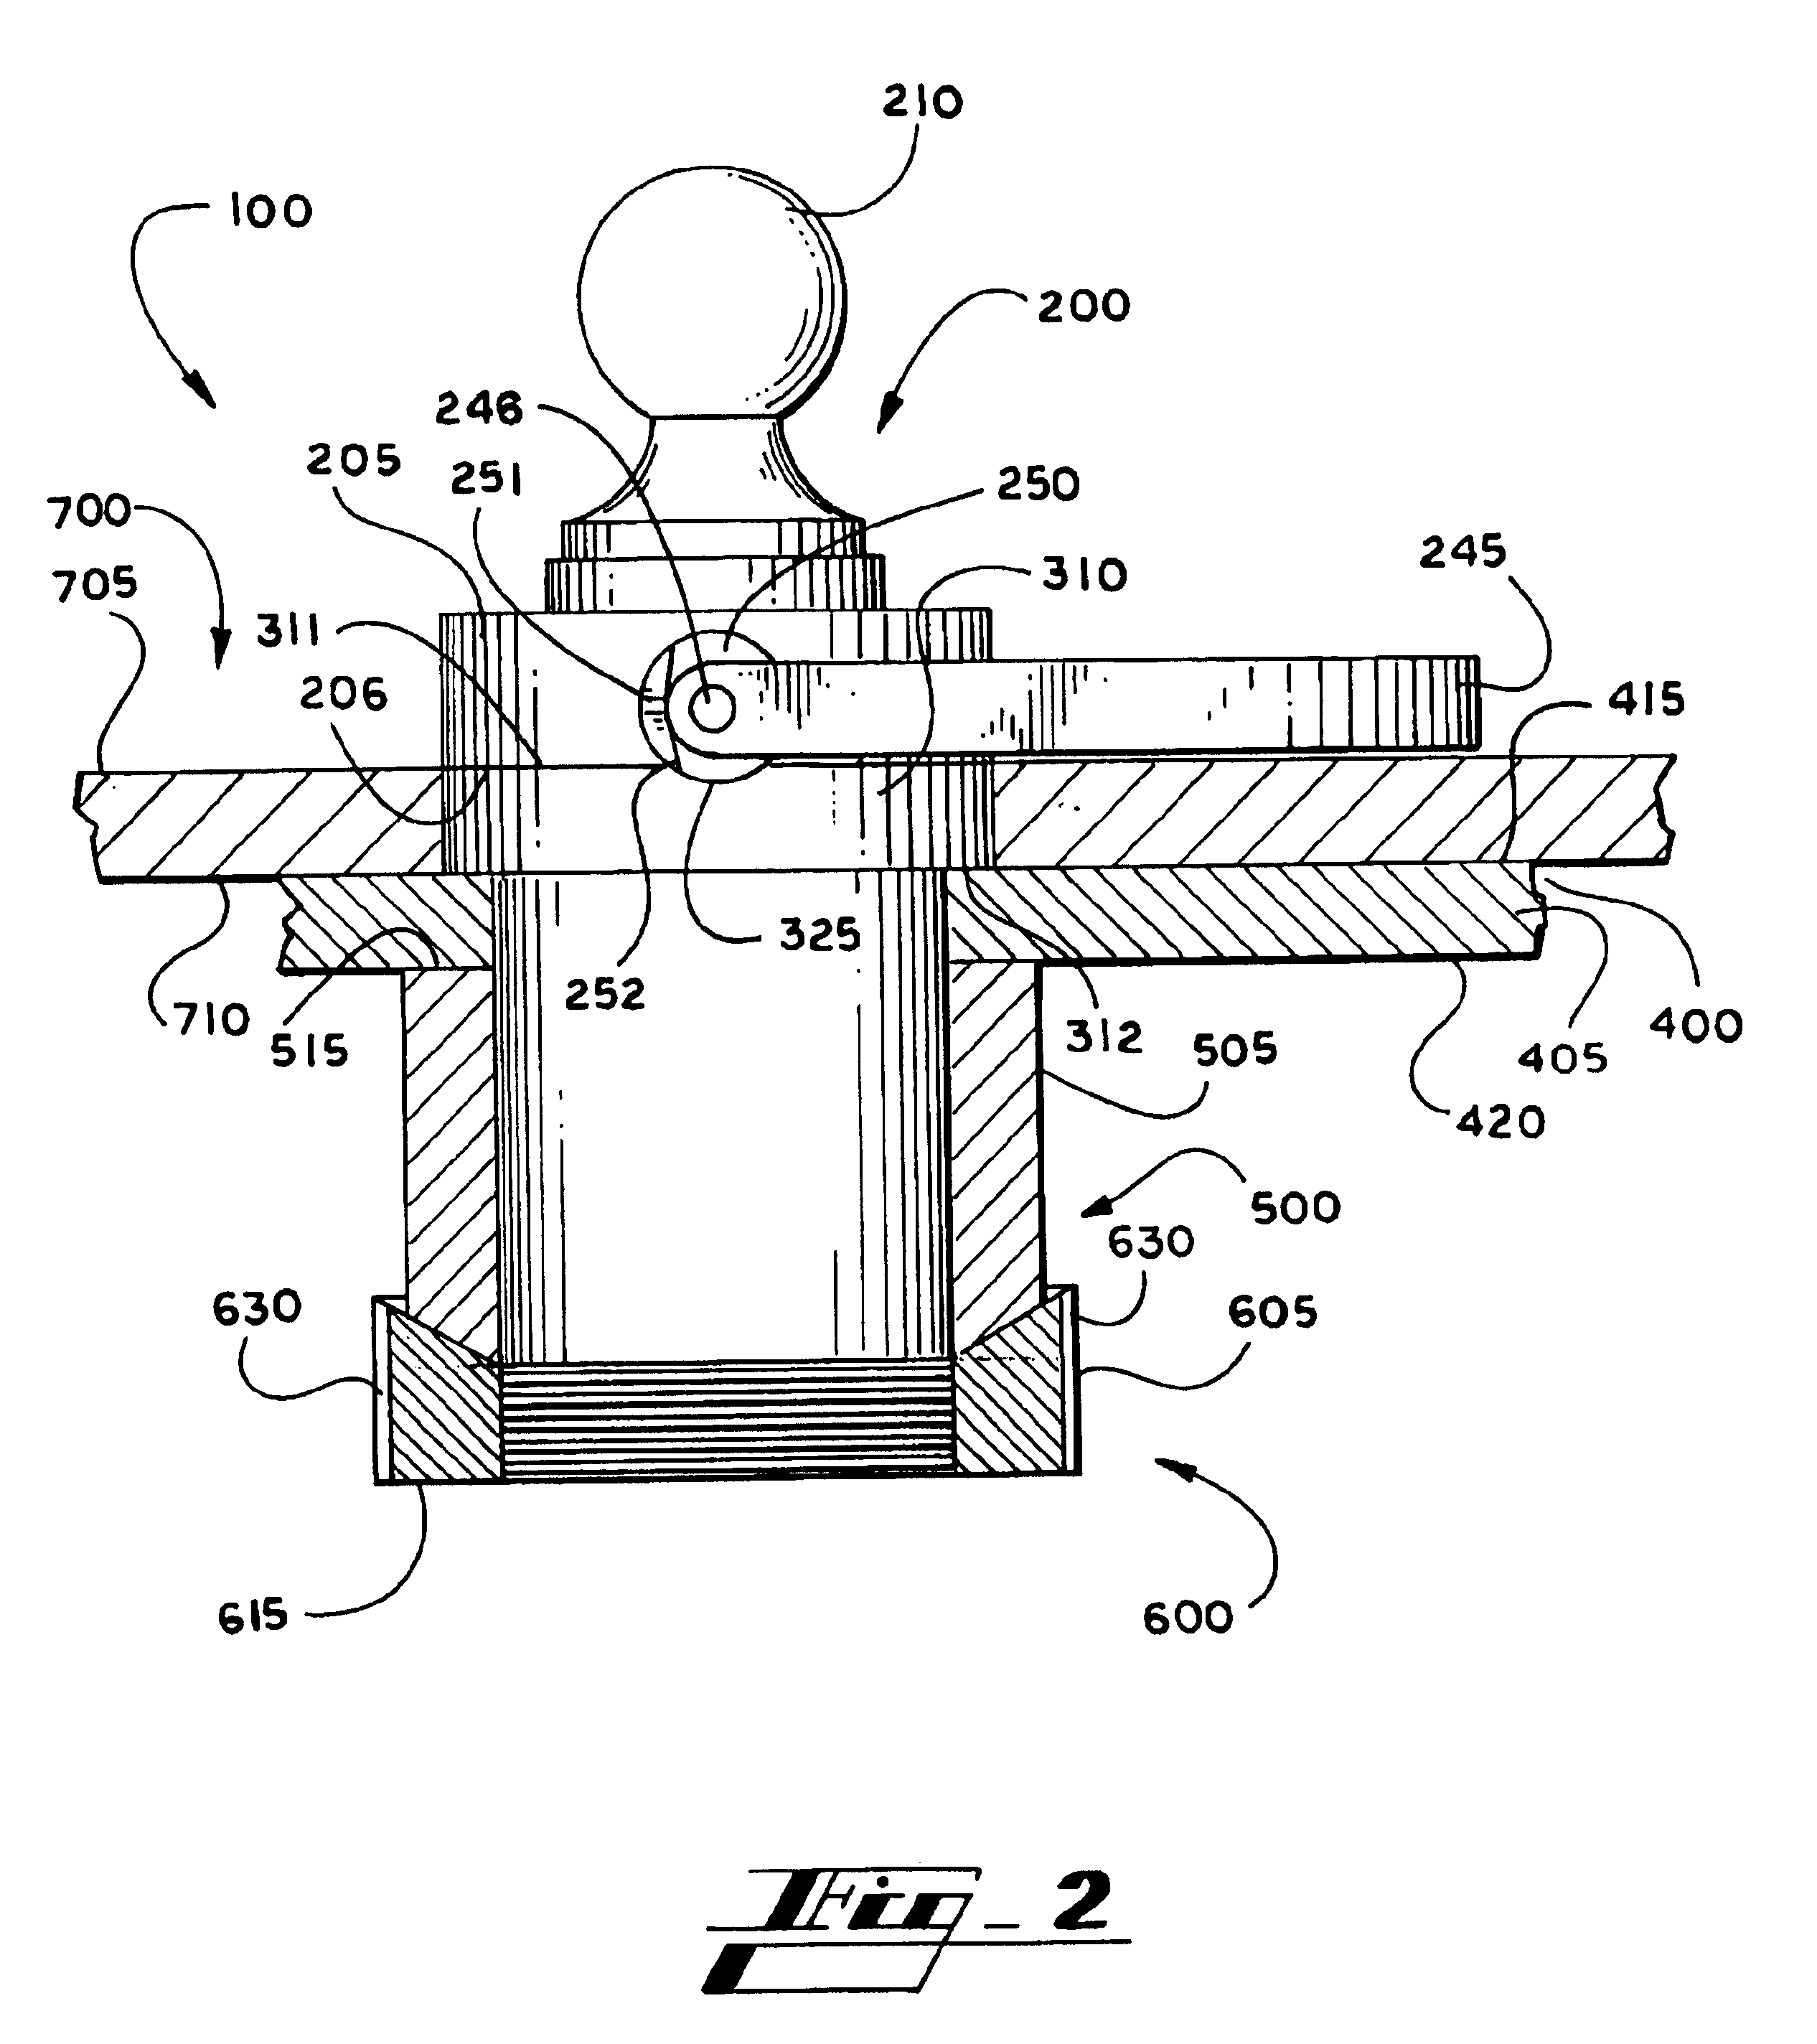 Cam locking removable hitch assembly apparatus and system